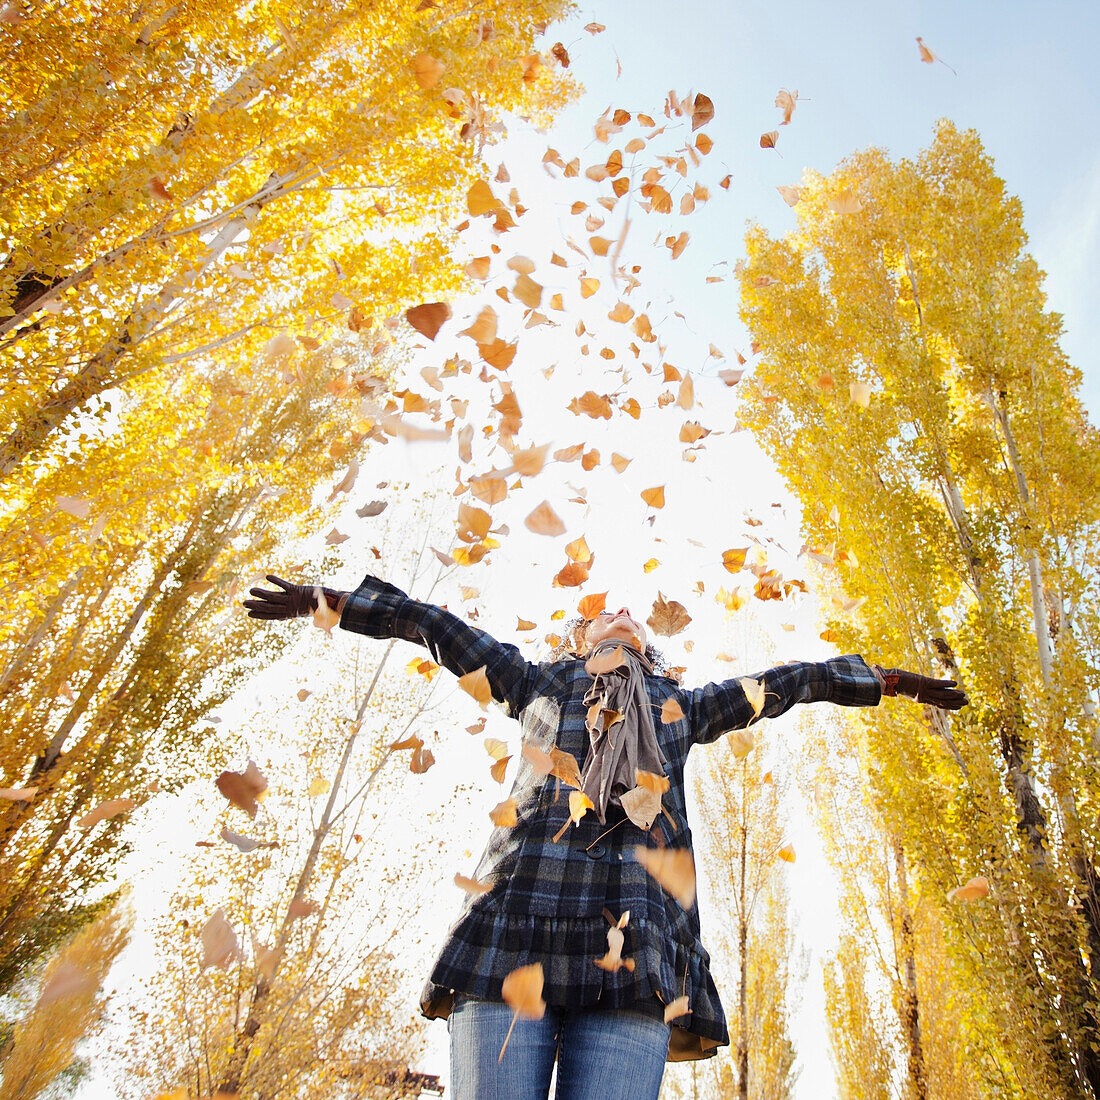 Caucasian woman playing with autumn leaves, Provo, Utah, USA